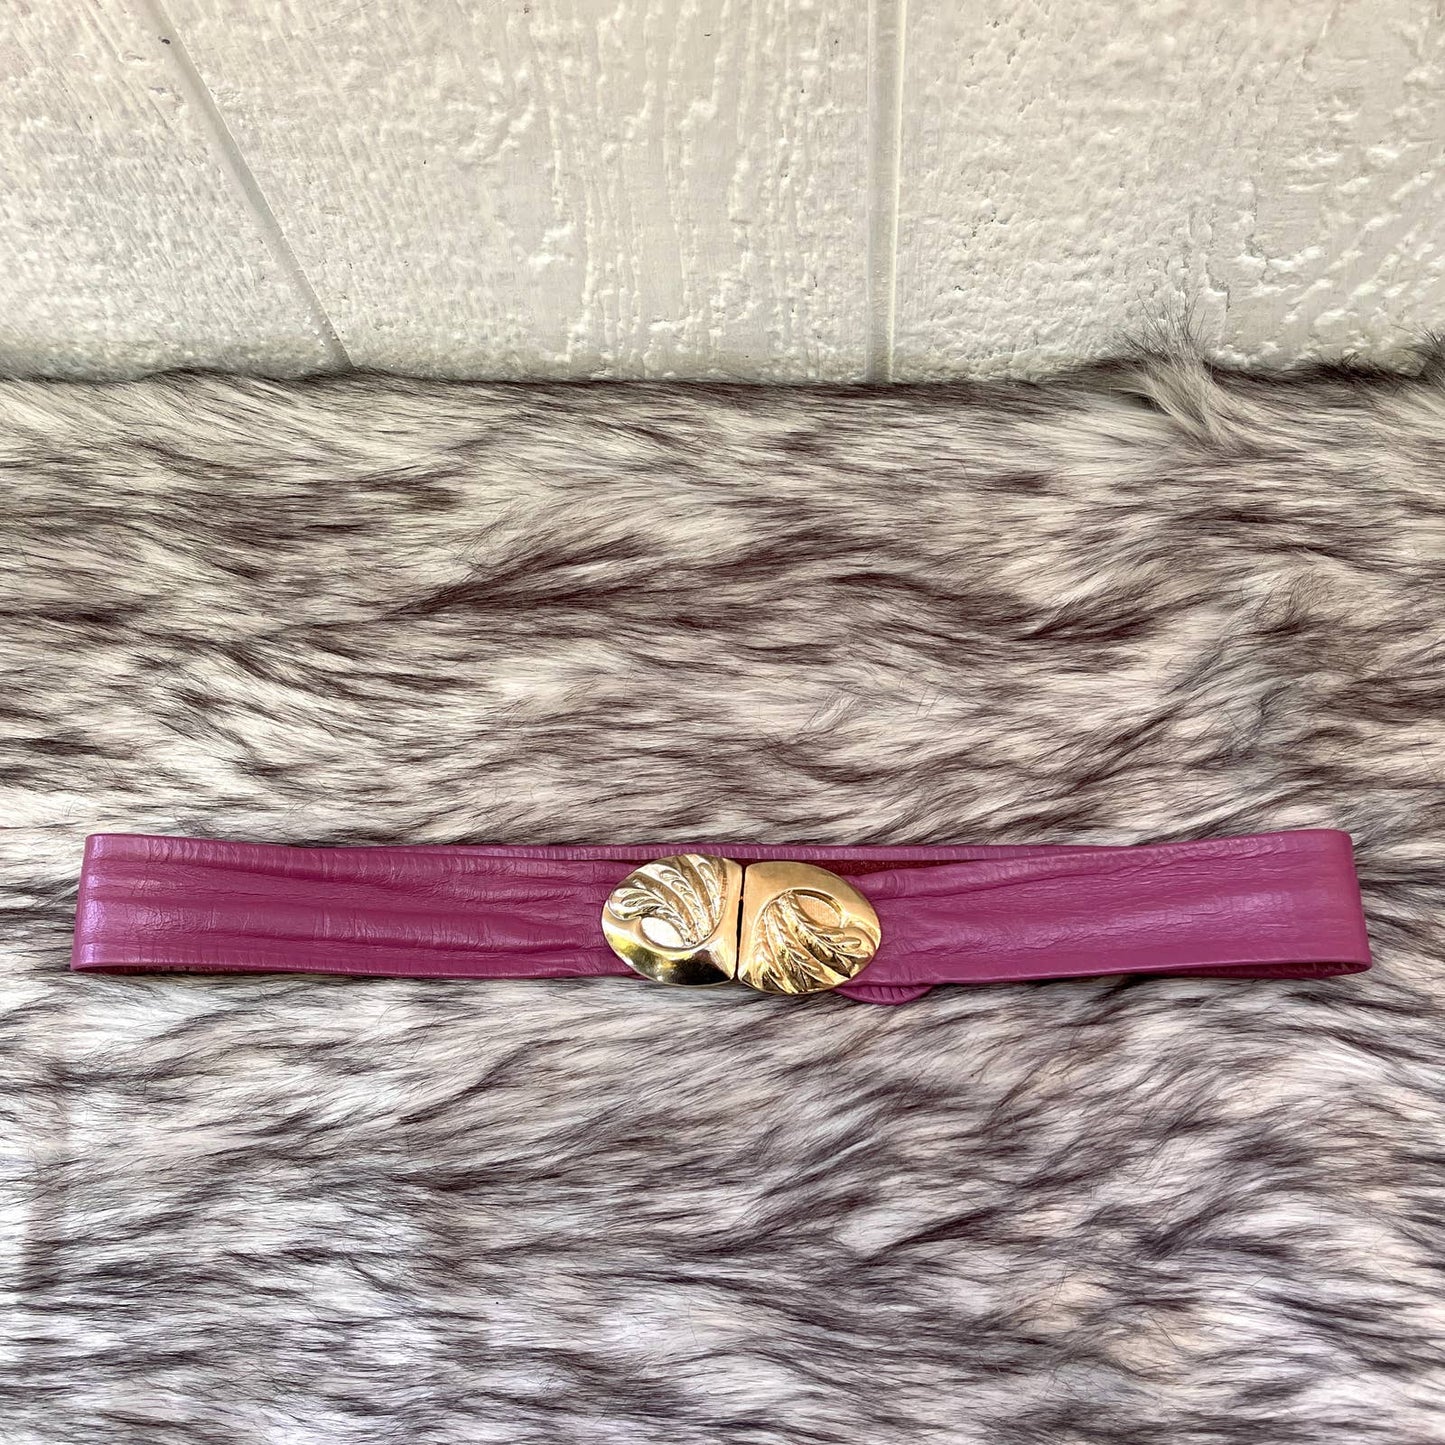 Vintage 80s Purple Leather Belt Gold Wheat Buckle Metal Hooked Size S M